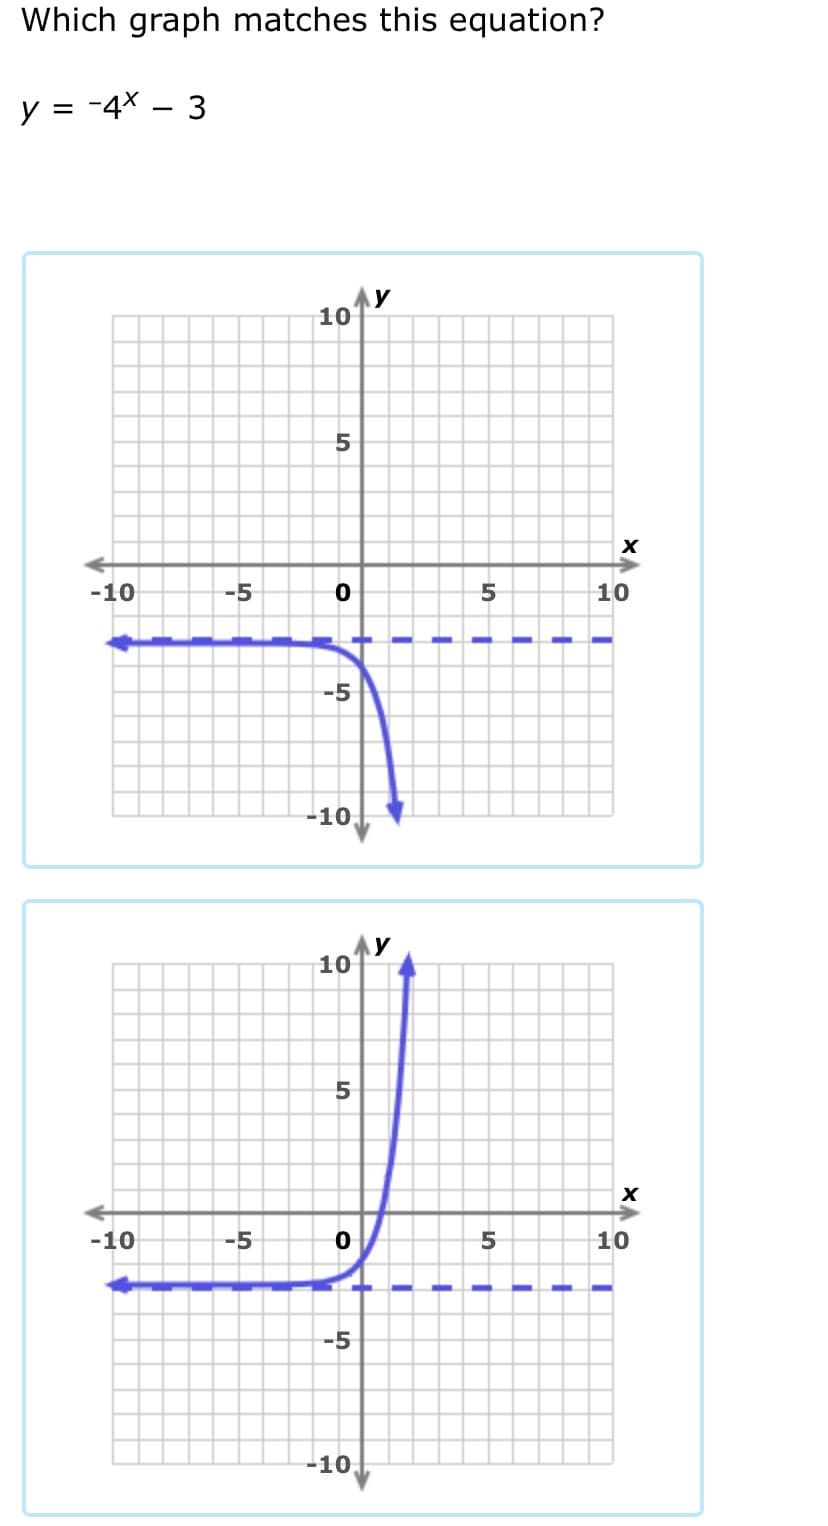 Which graph matches this equation?
y = -4* – 3
10
-10
-5
10
-5
-10,
y
10
-10
-5
10
-5
-10,
1
